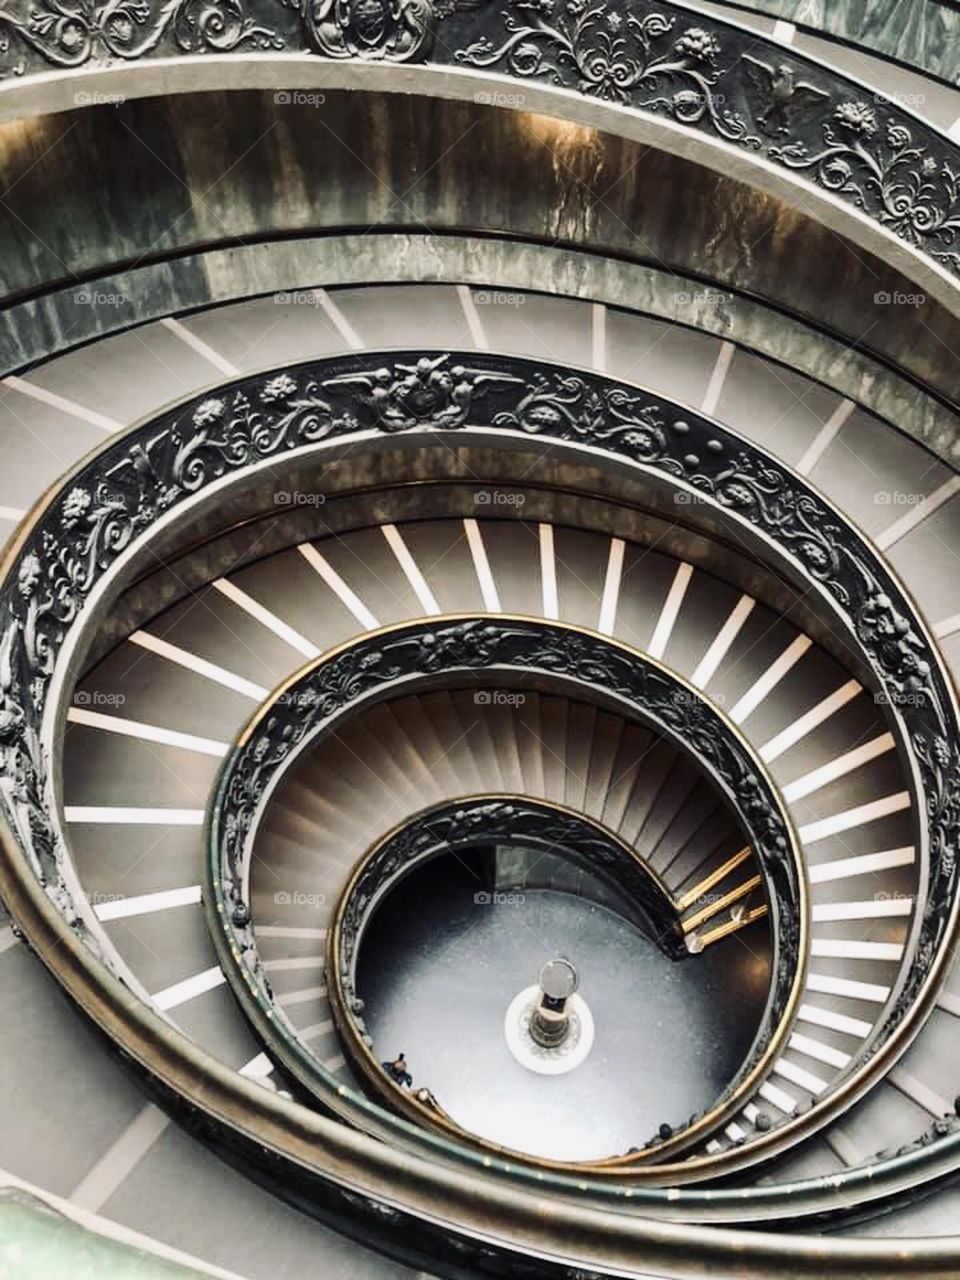 The historic stair case in Italy 